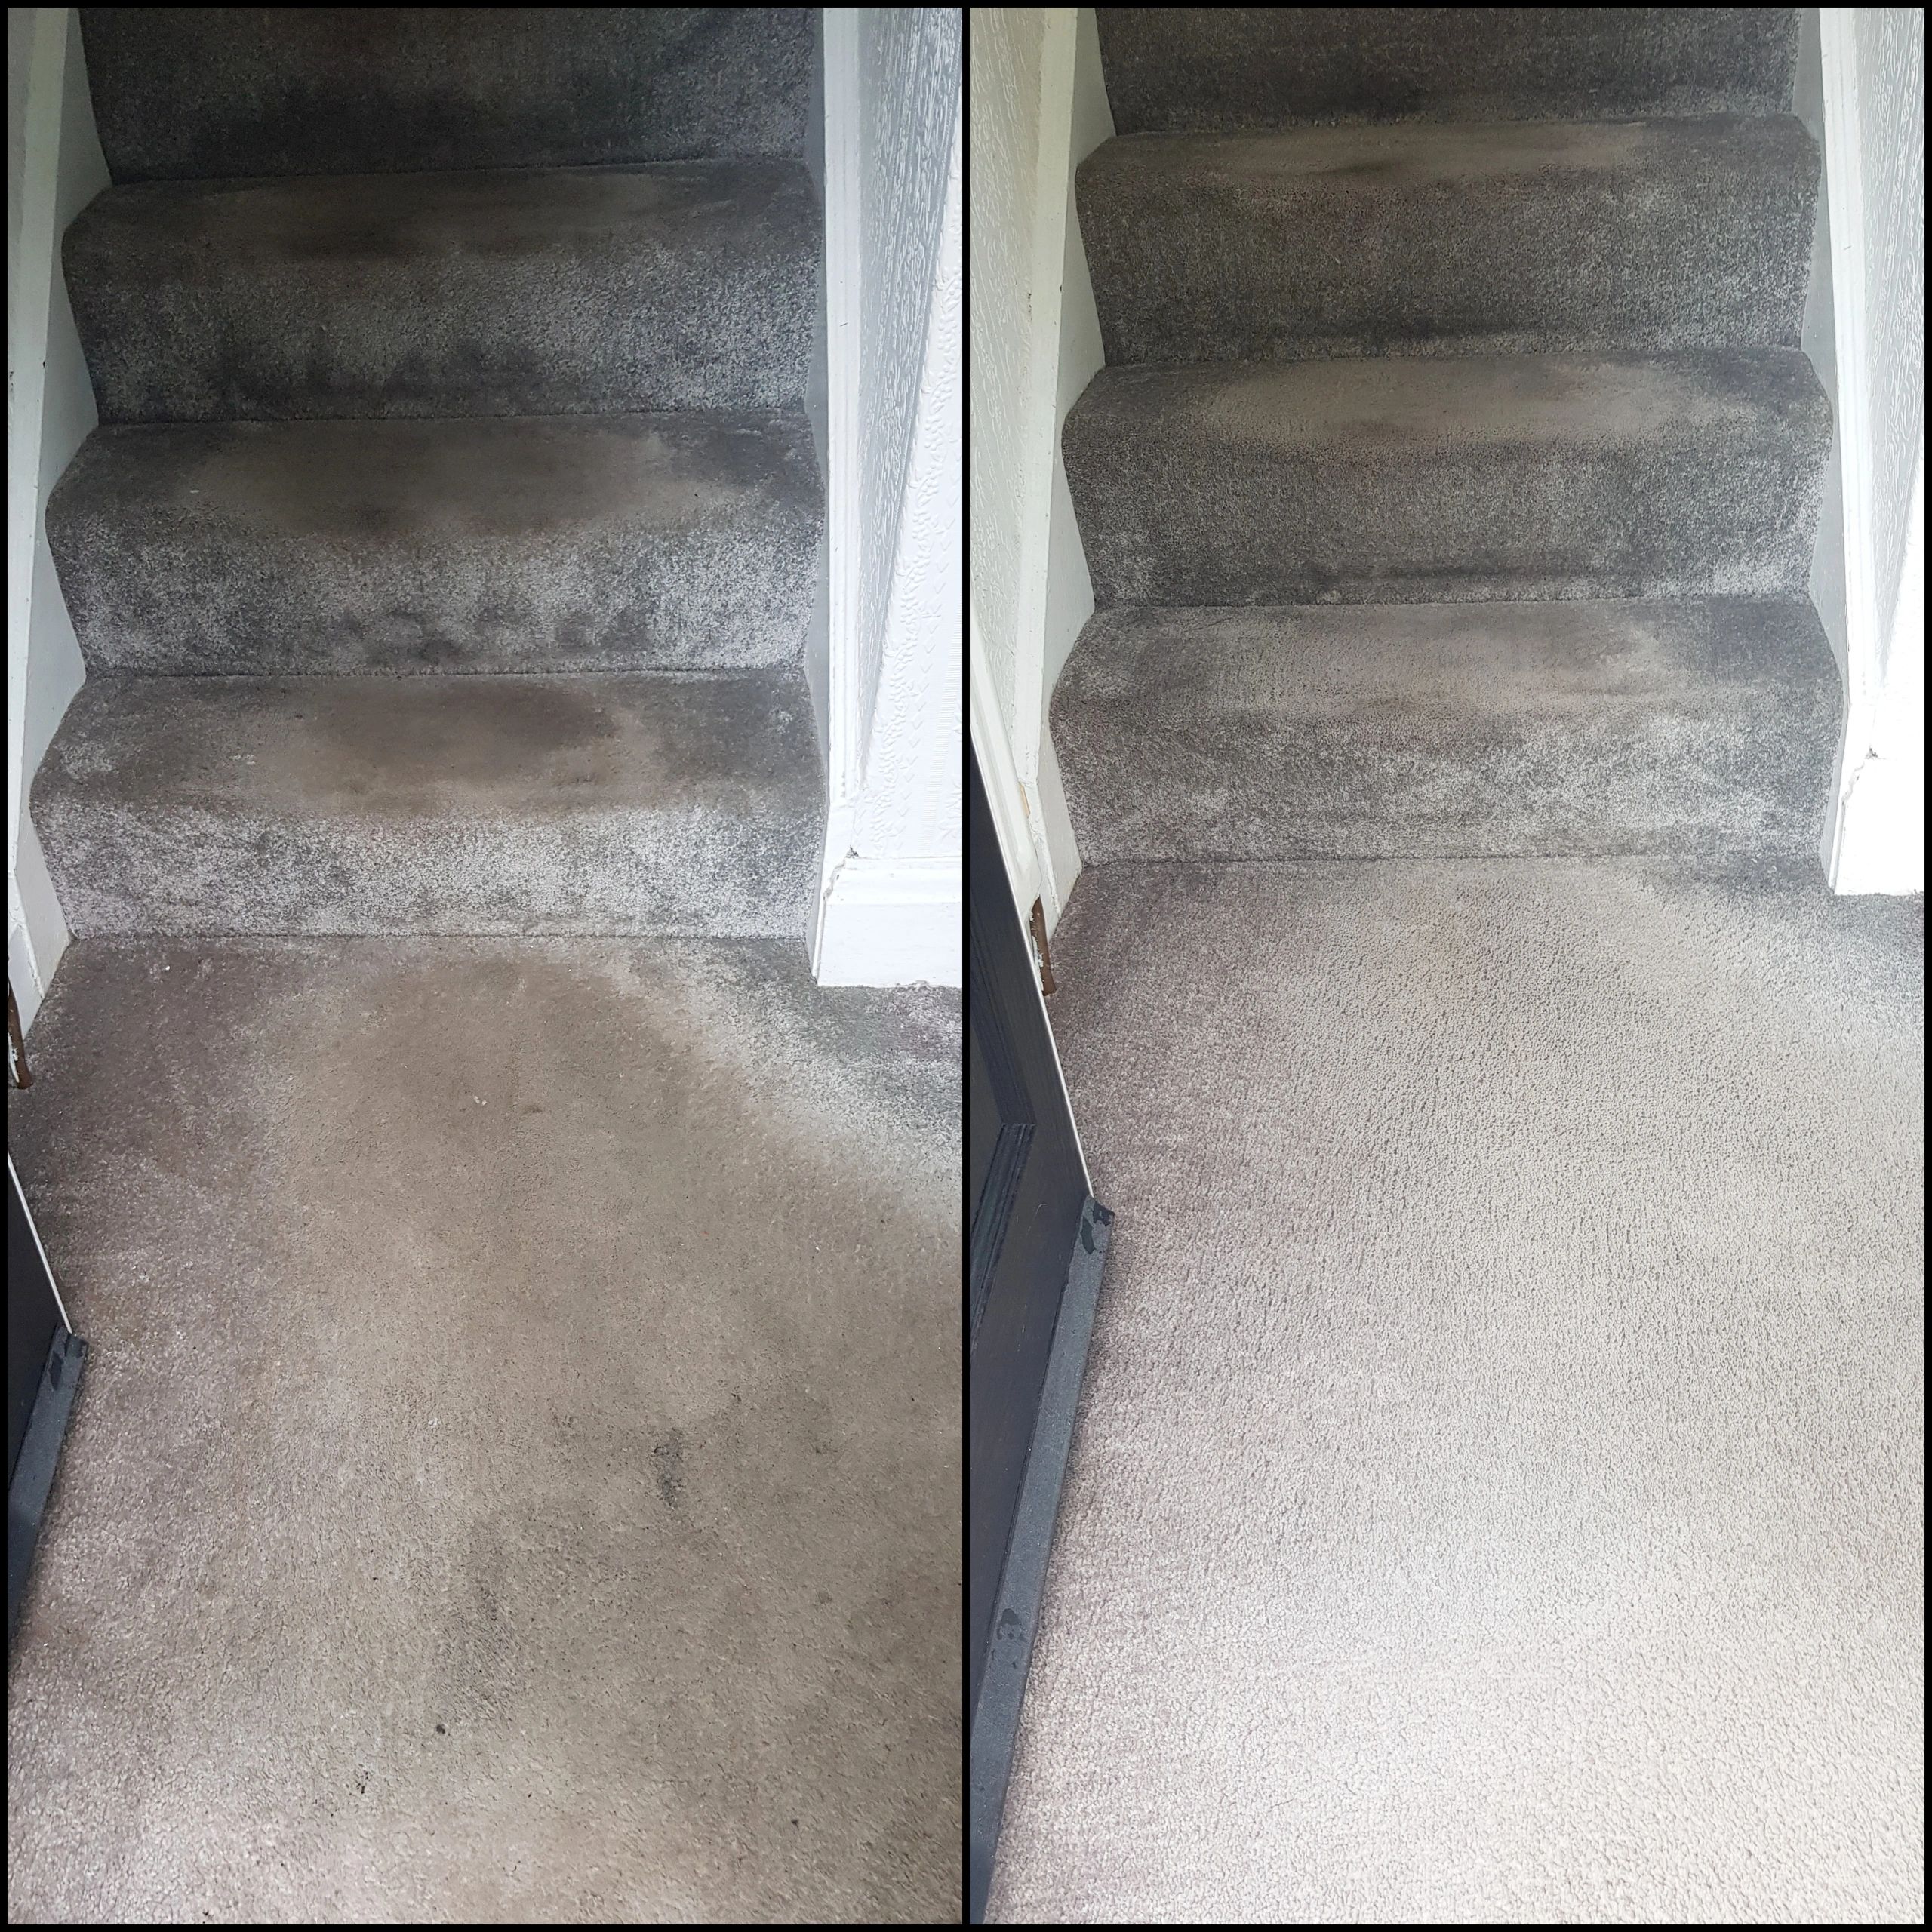 Heavily soiled carpet cleaning in Gildersome, Leeds 